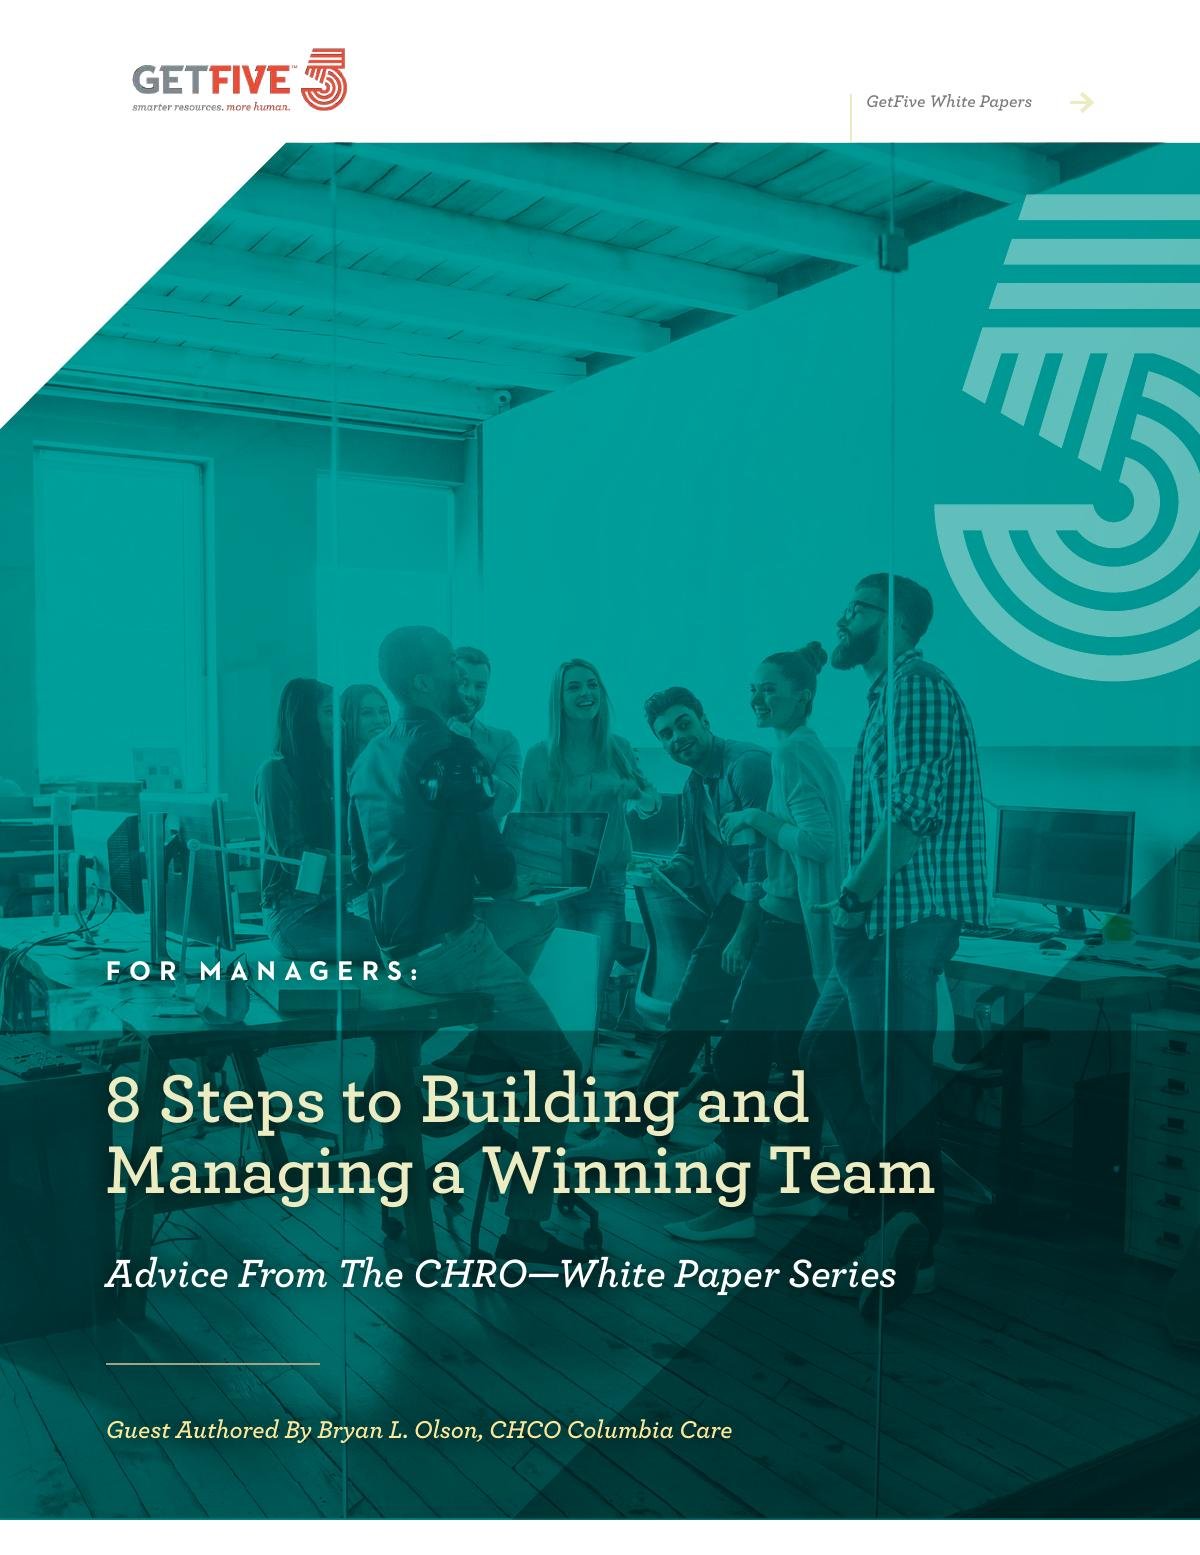 8 Steps to Building and Managing a Winning Team - GetFive Whitepaper